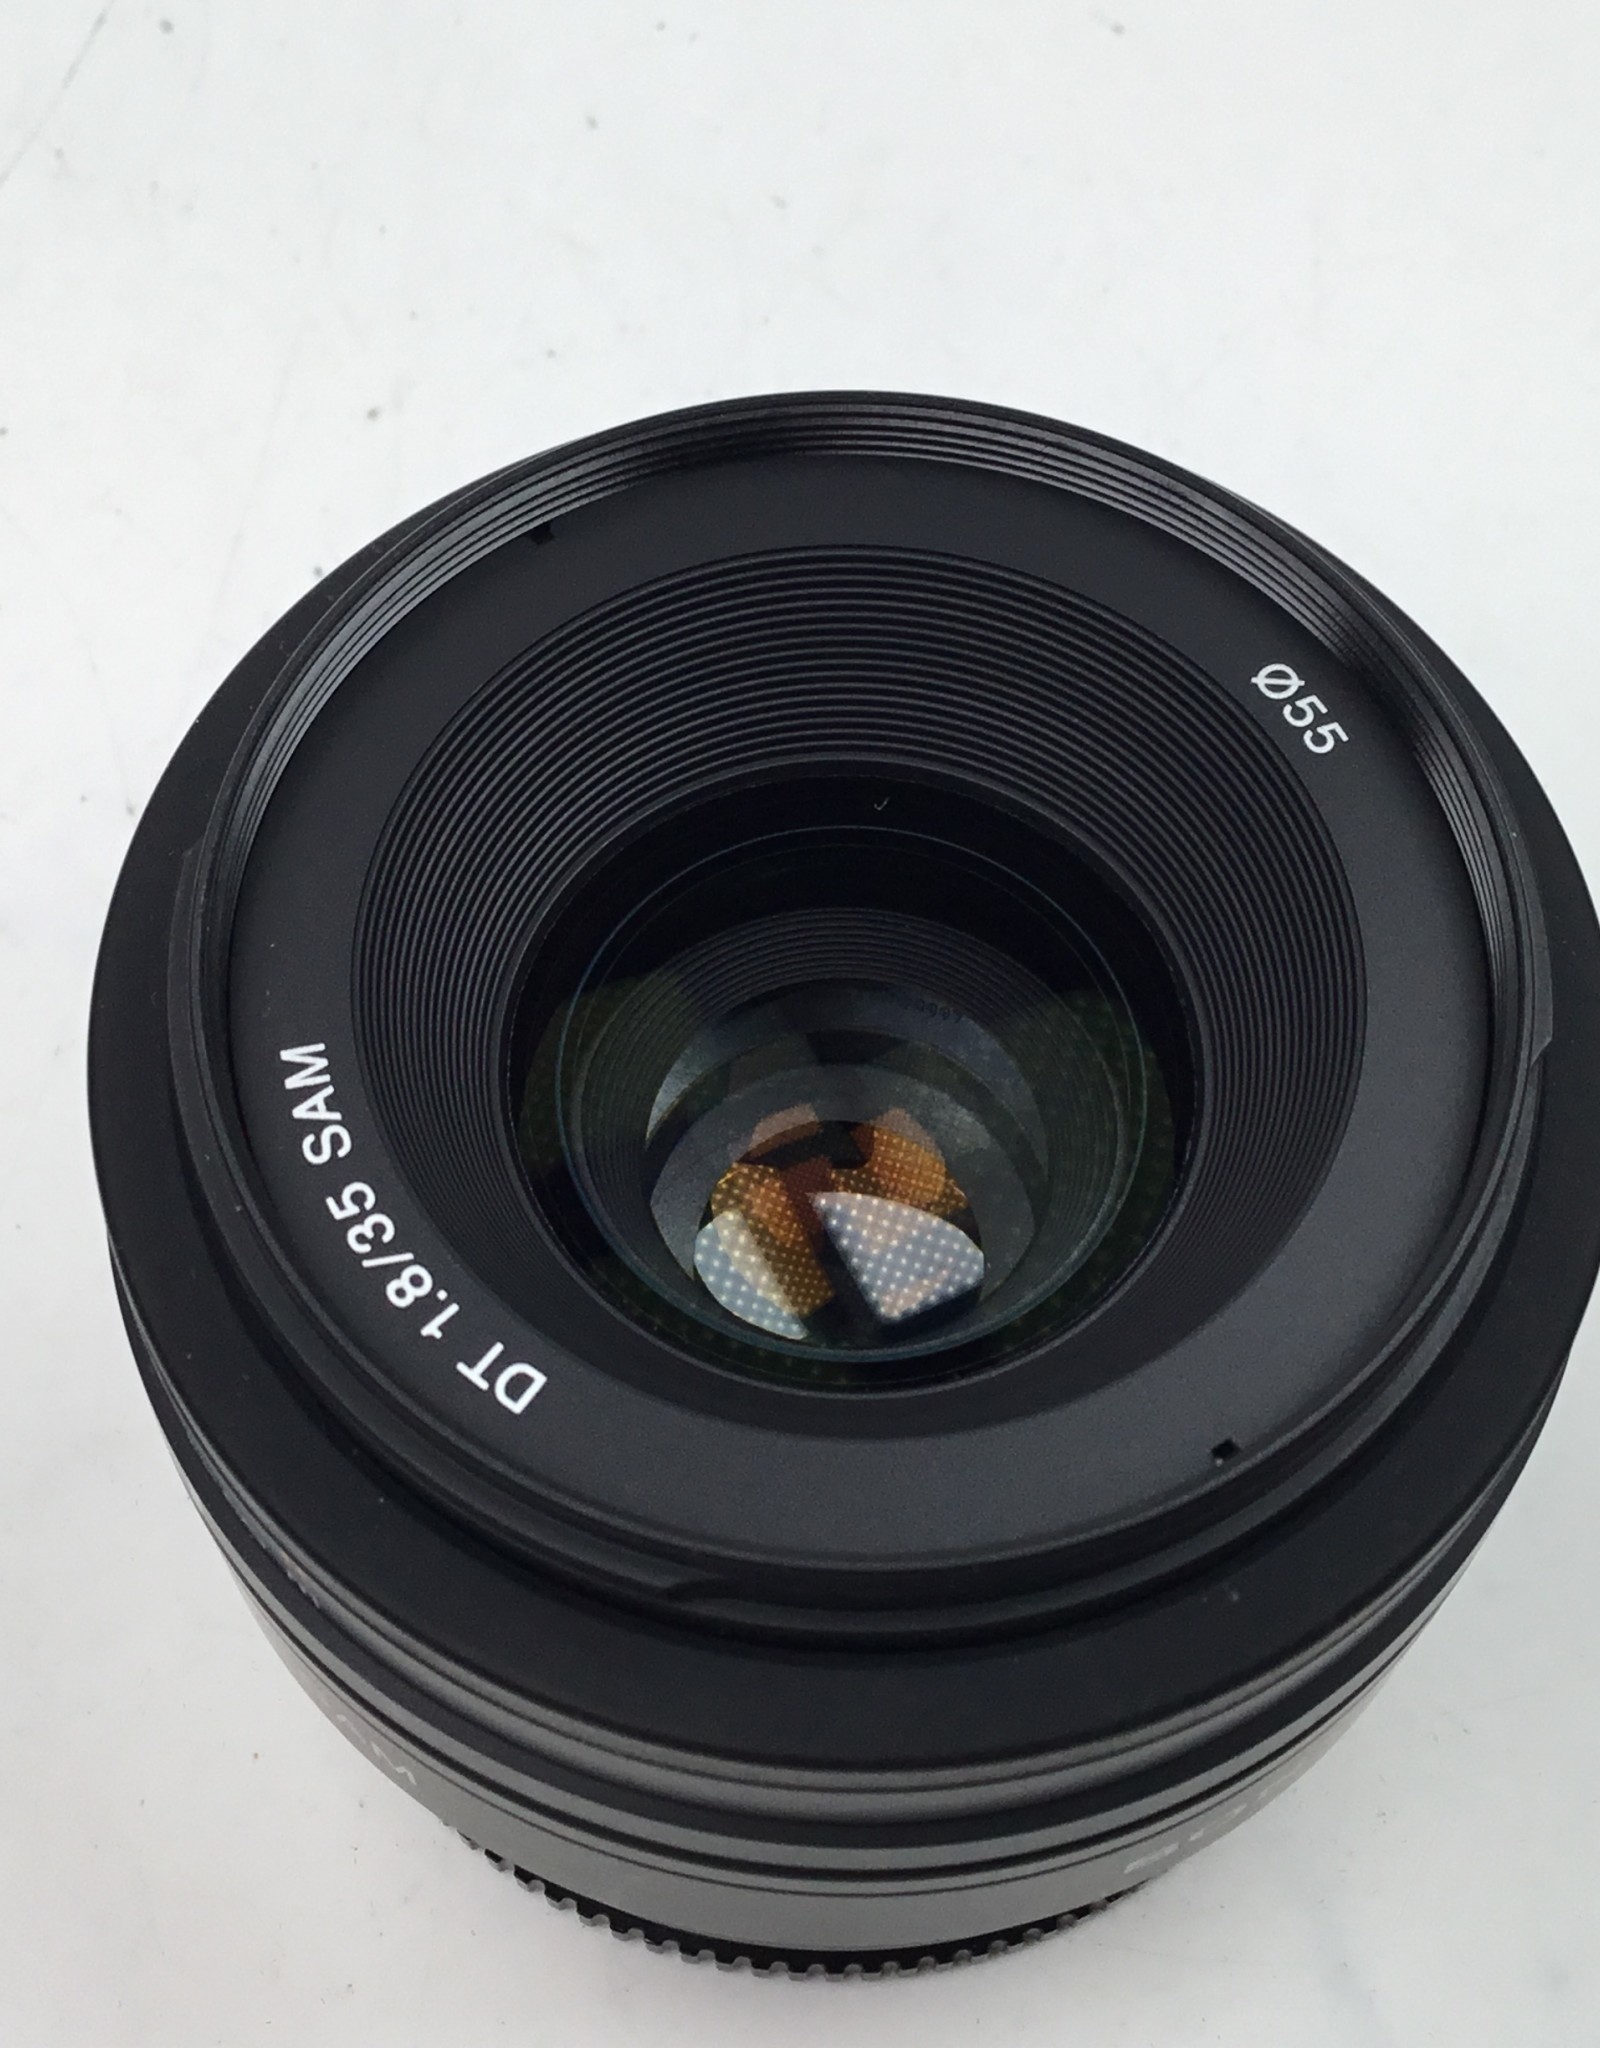 SONY Sony DT 35mm f1.8 SAM Lens for A Mount Used  Good